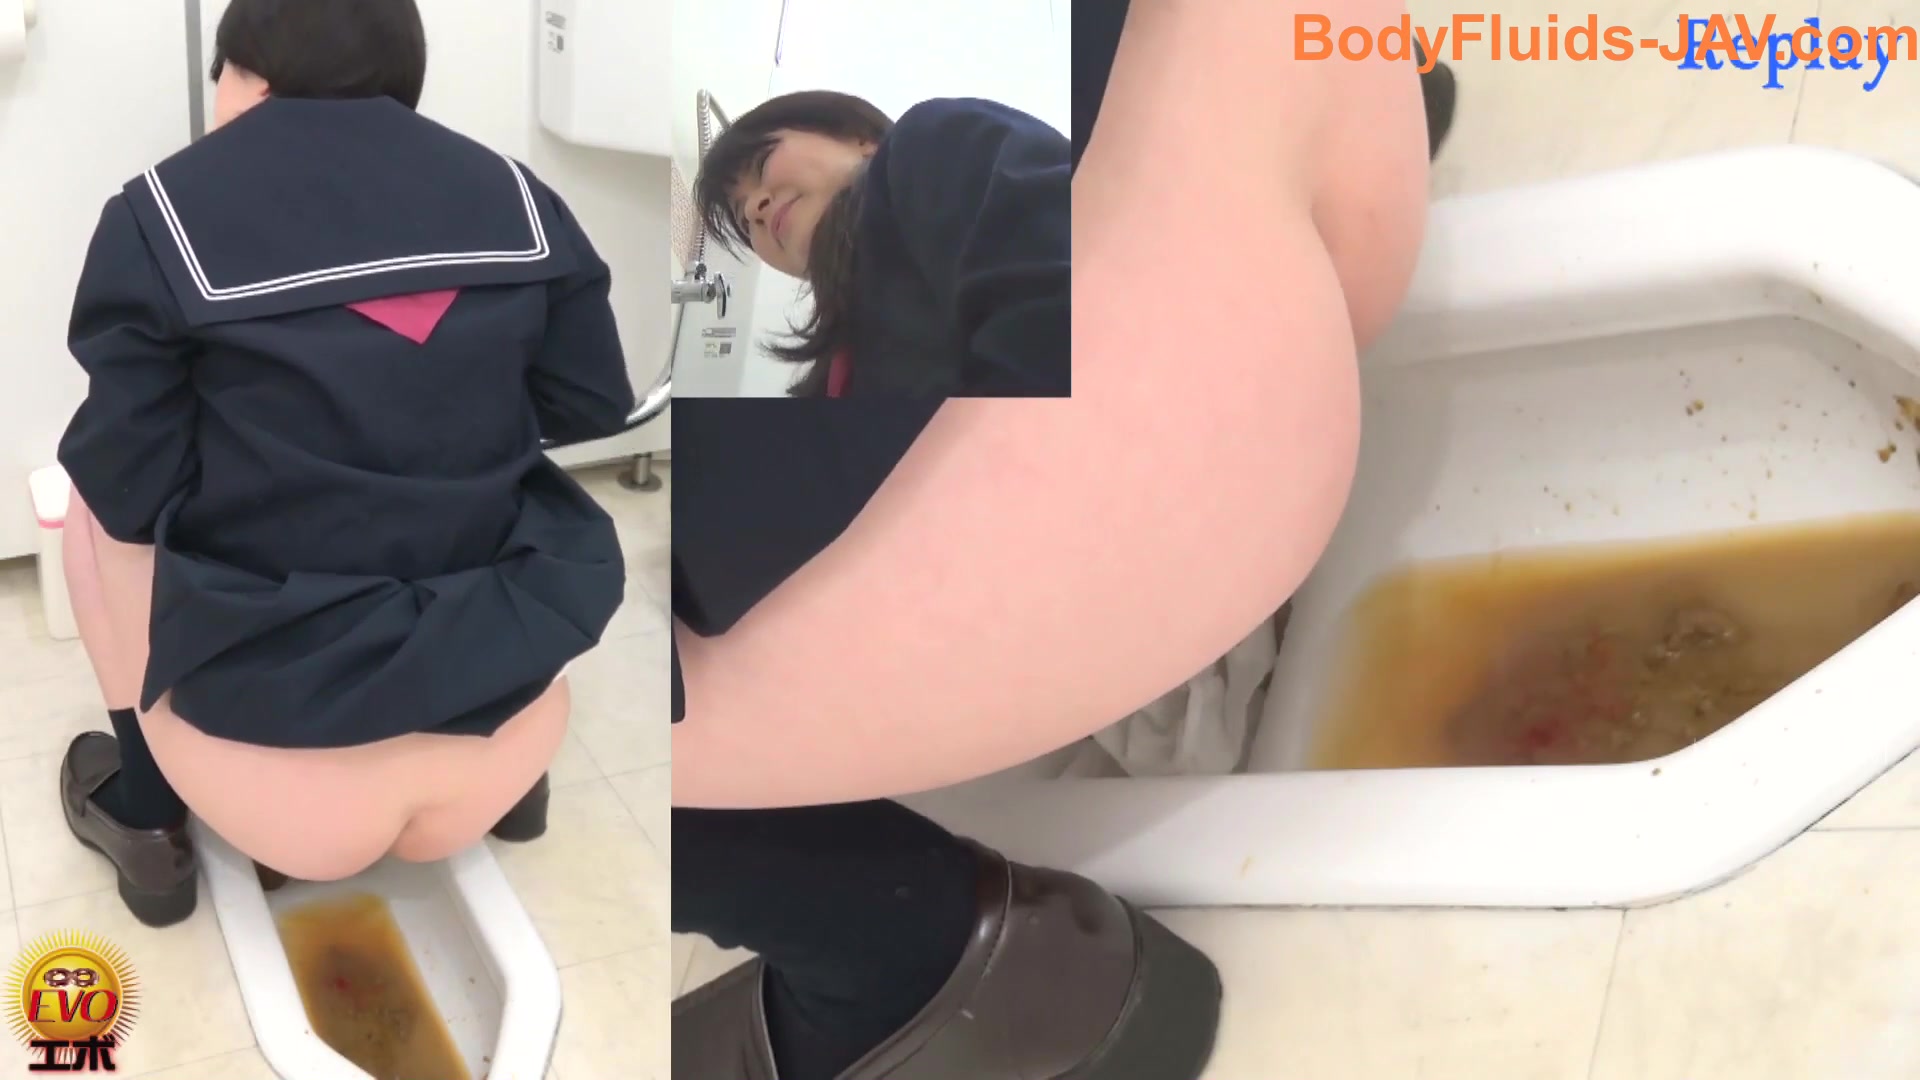 Lunch Room - Bad School Lunch 19 - ScatFap.com - scat porn search - FREE videos of  extreme kaviar and copro sex, dirty shit eating and smearing